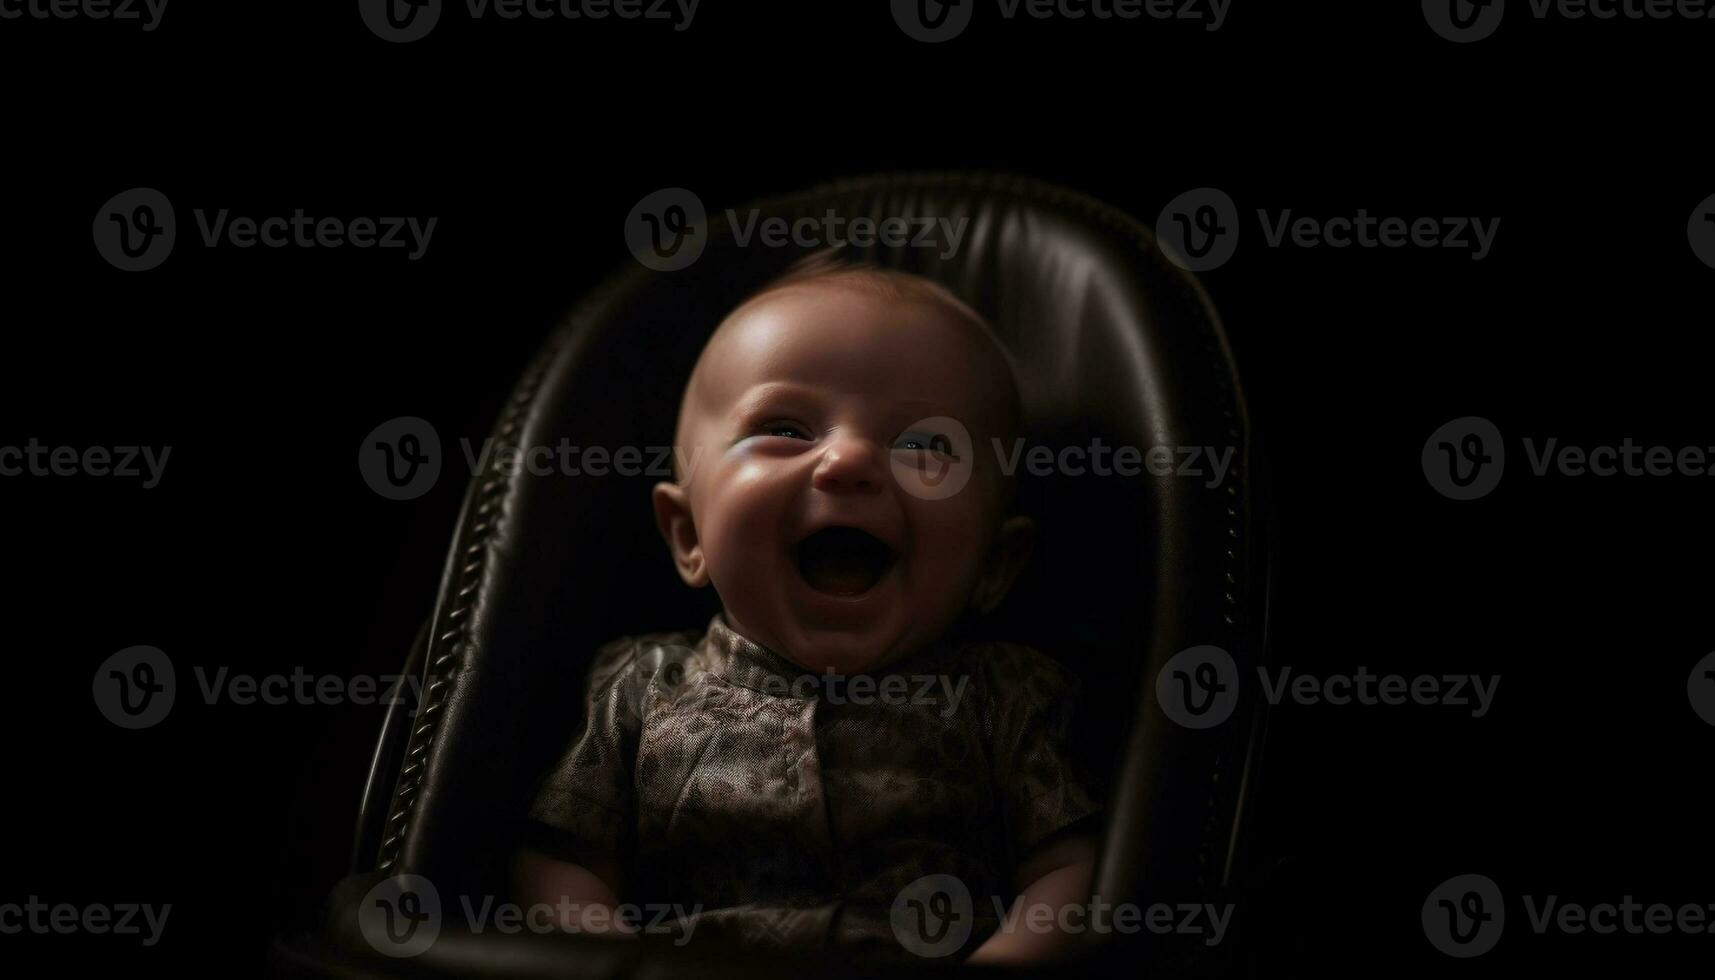 Cute baby boy and girl smiling in portrait on black background generated by AI photo